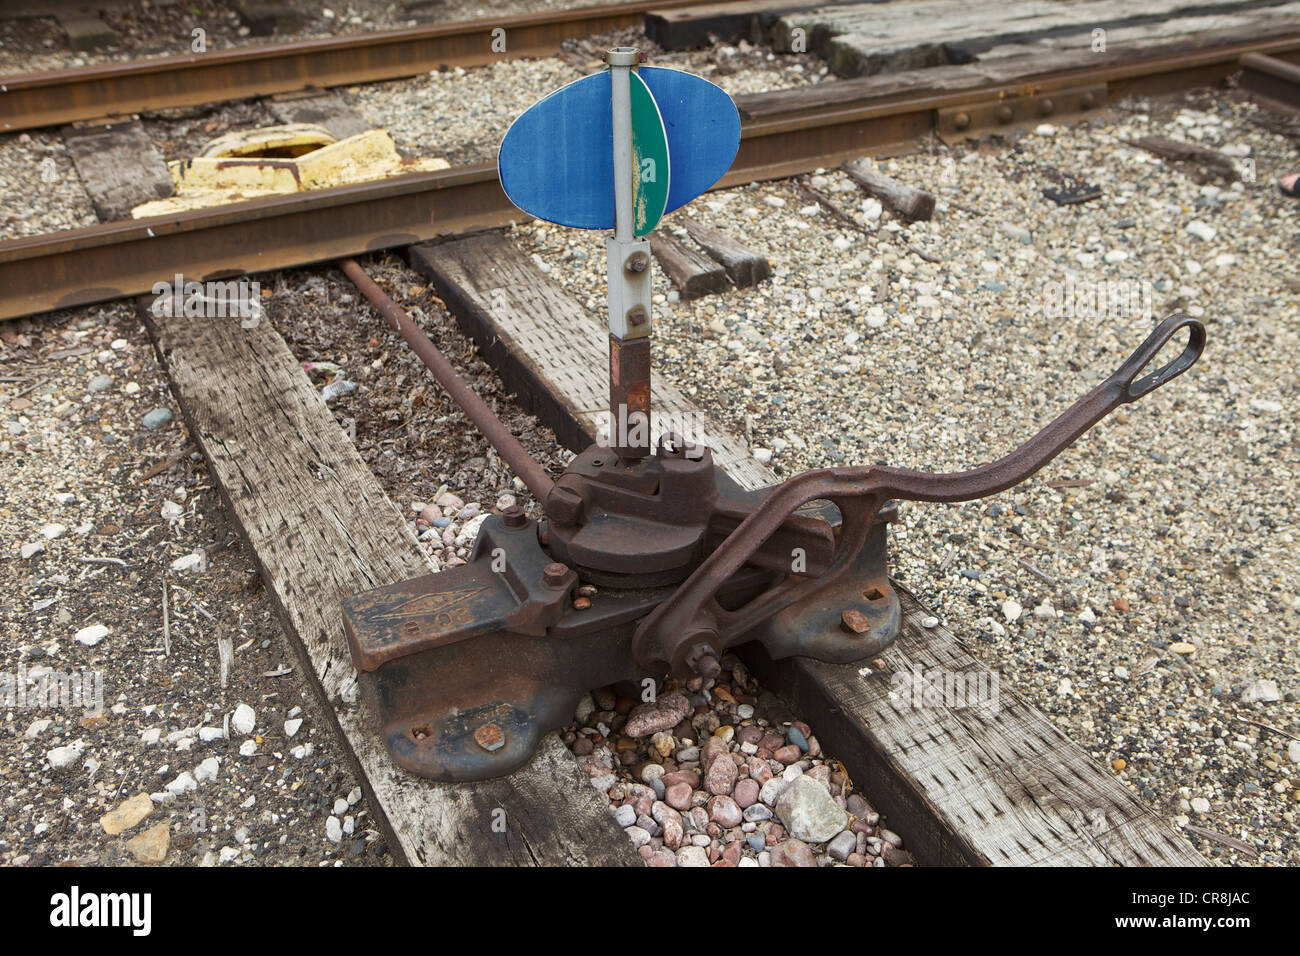 Blue and green railroad track switch stand Stock Photo